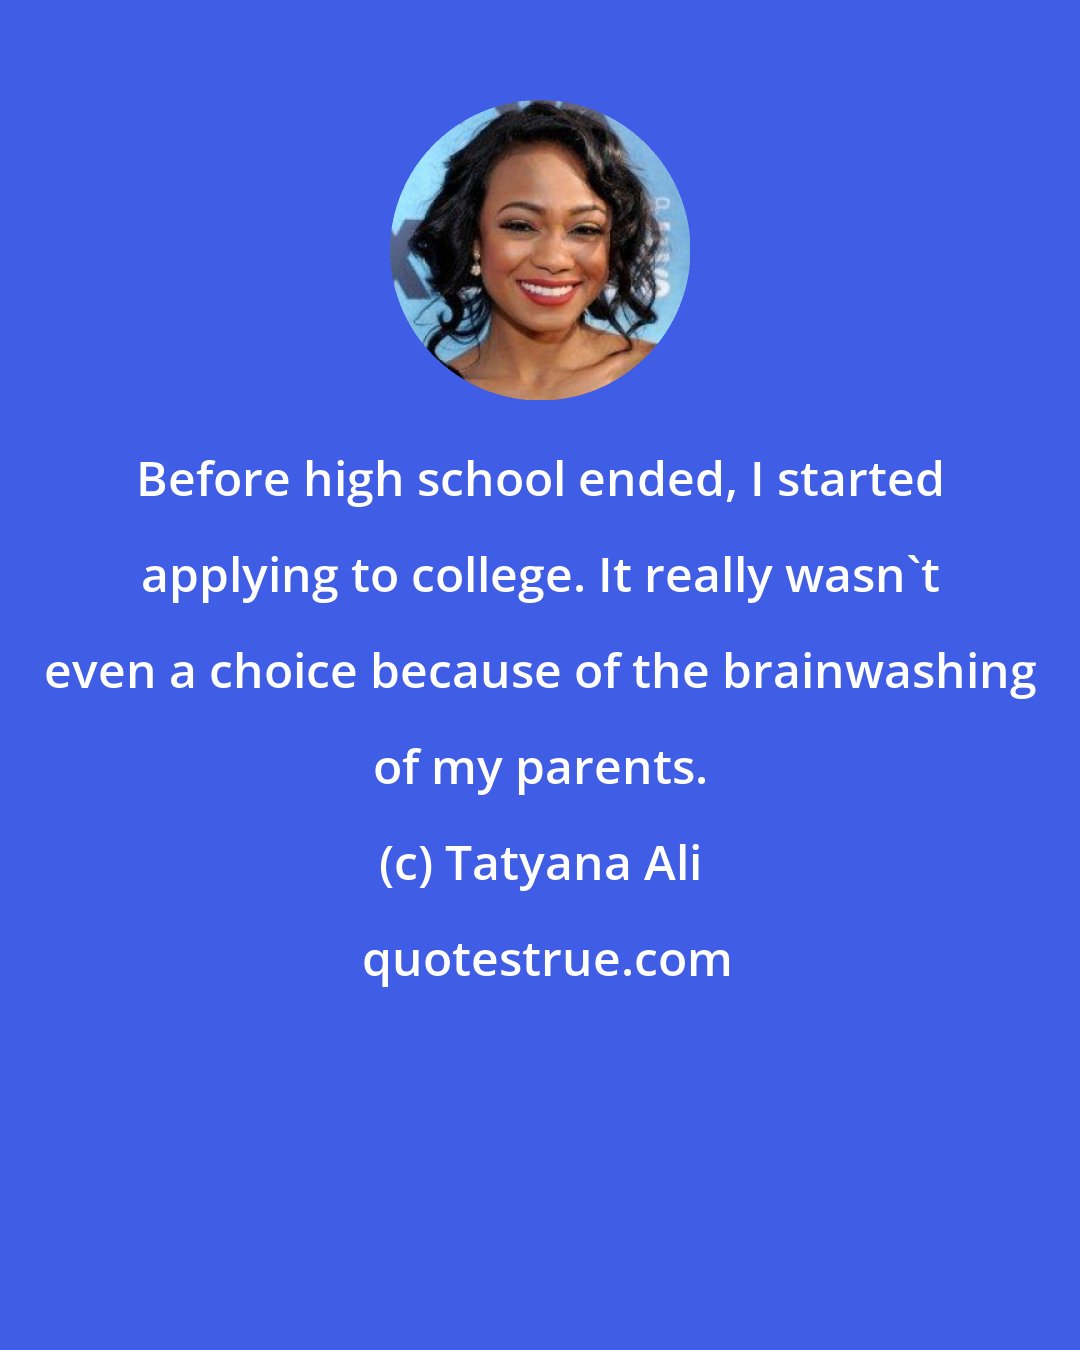 Tatyana Ali: Before high school ended, I started applying to college. It really wasn't even a choice because of the brainwashing of my parents.